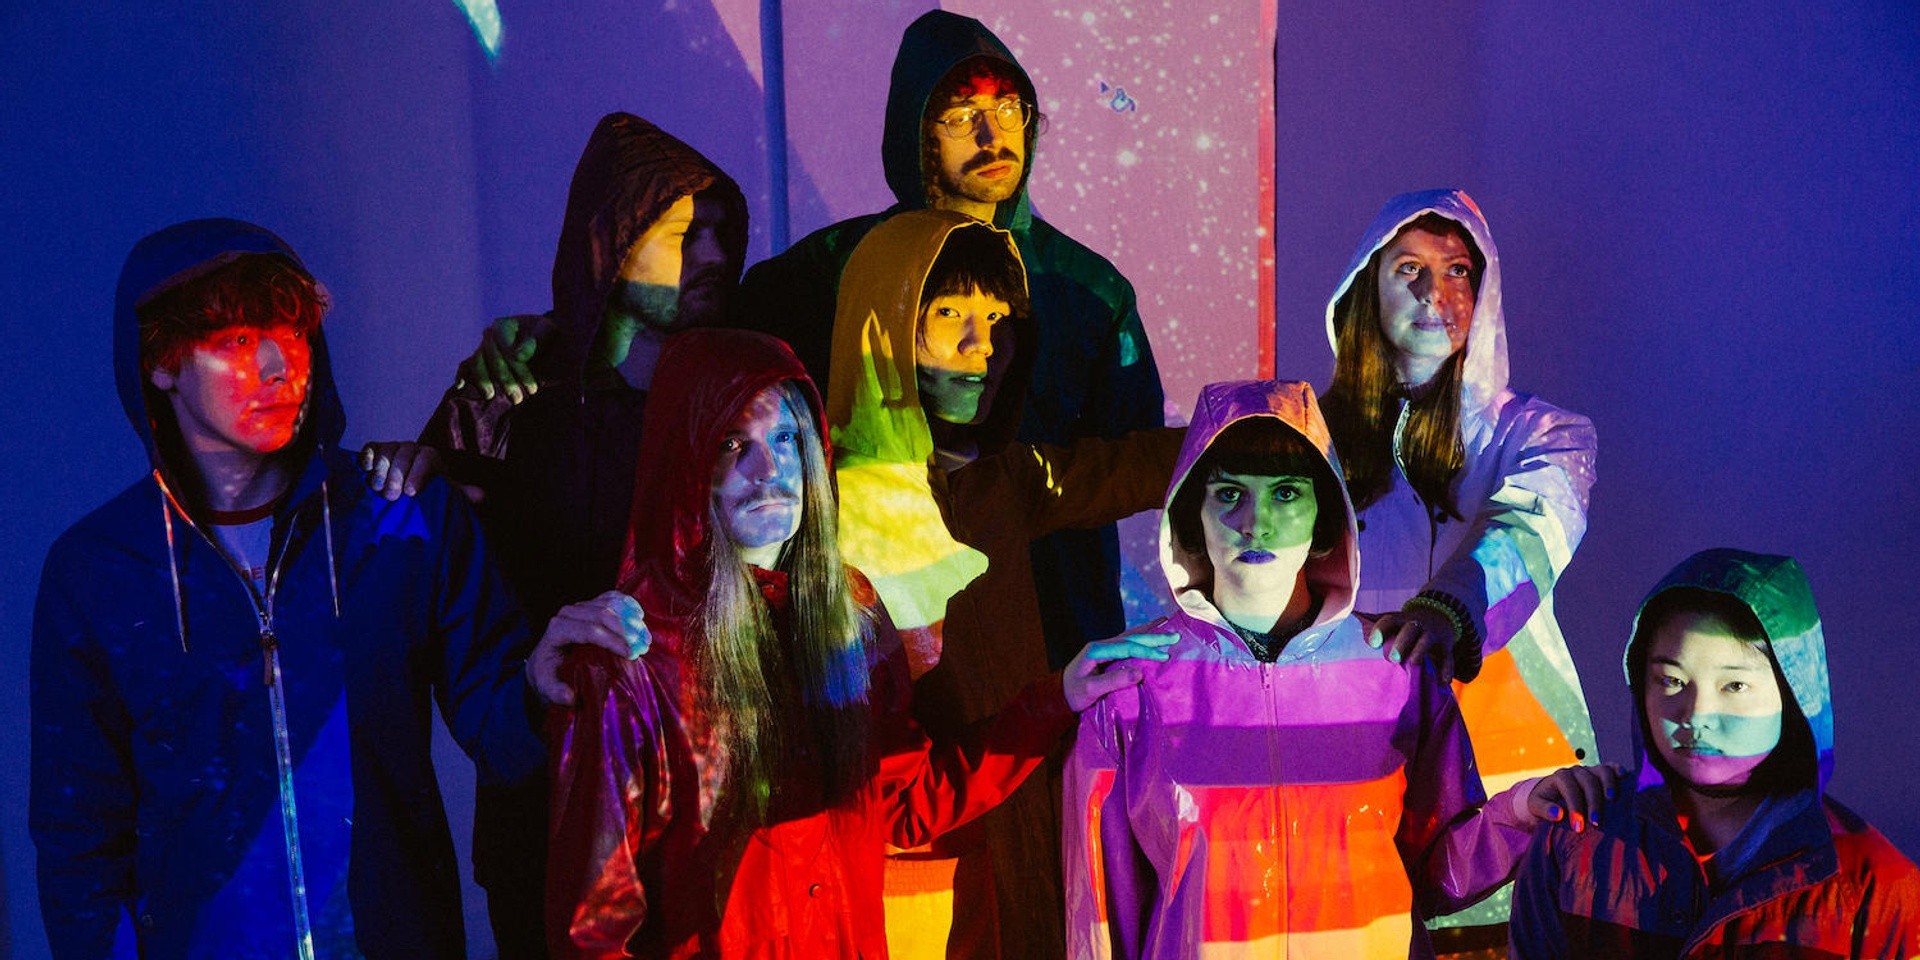 "It's a phenomenal thing when you have eight people in a band": An interview with Harry of Superorganism